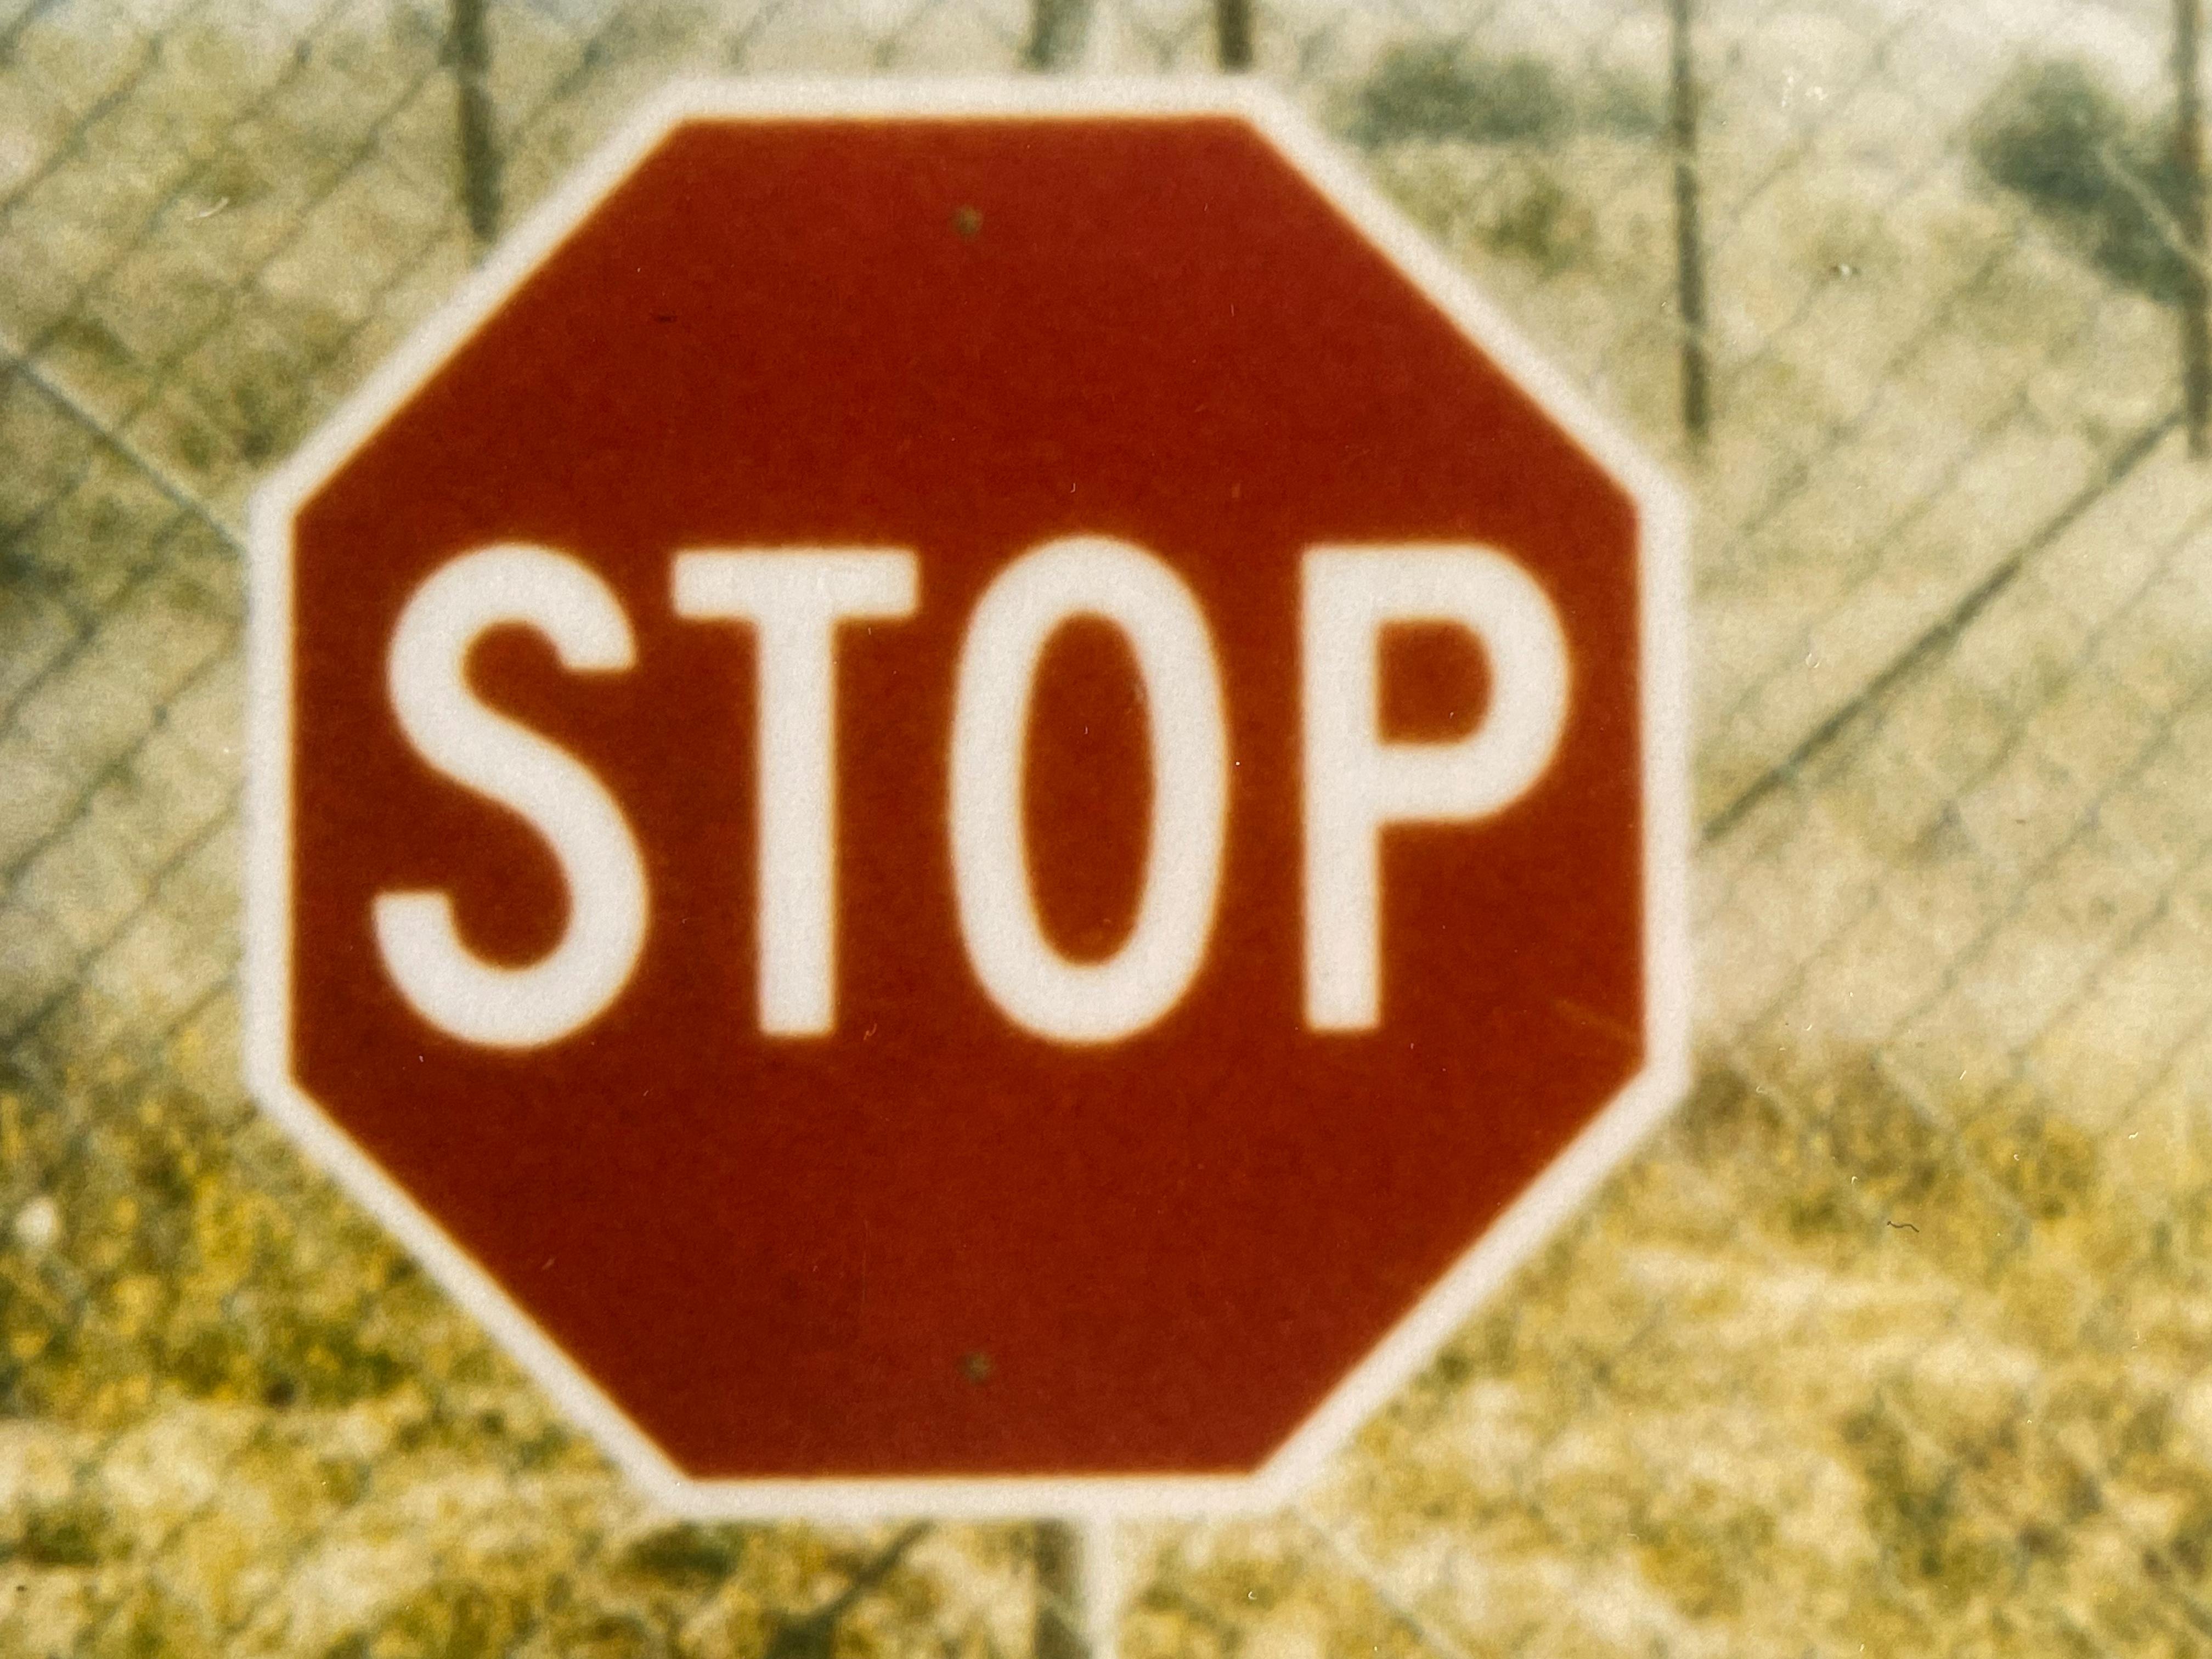 Stop (Drive to the Desert) - 1999

44x59cm, 
Edition of 5 plus 2 Artist Proofs. 
Analog C-Print, hand-printed by the artist, based on the original Polaroid. 
Signed on verso with Certificate. 
Artist Inventory #225. 
Not mounted. 

Stefanie